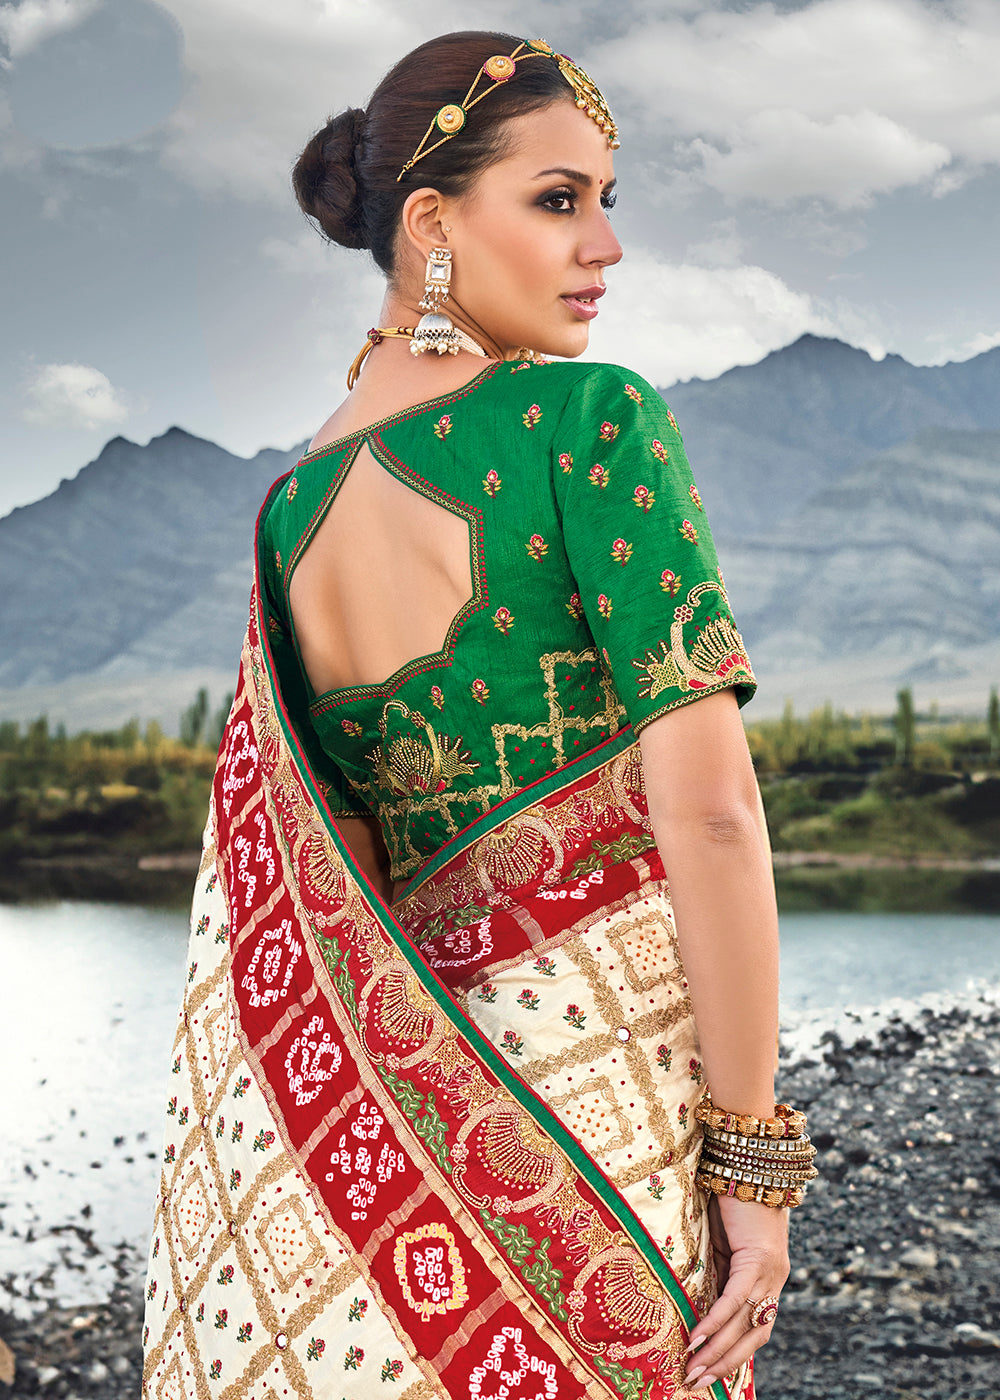 Shop Now Traditional Cream Embroidered Kachhi Bandhej Sateen Saree Saree from Empress Clothing in USA, UK, Canada & Worldwide. 